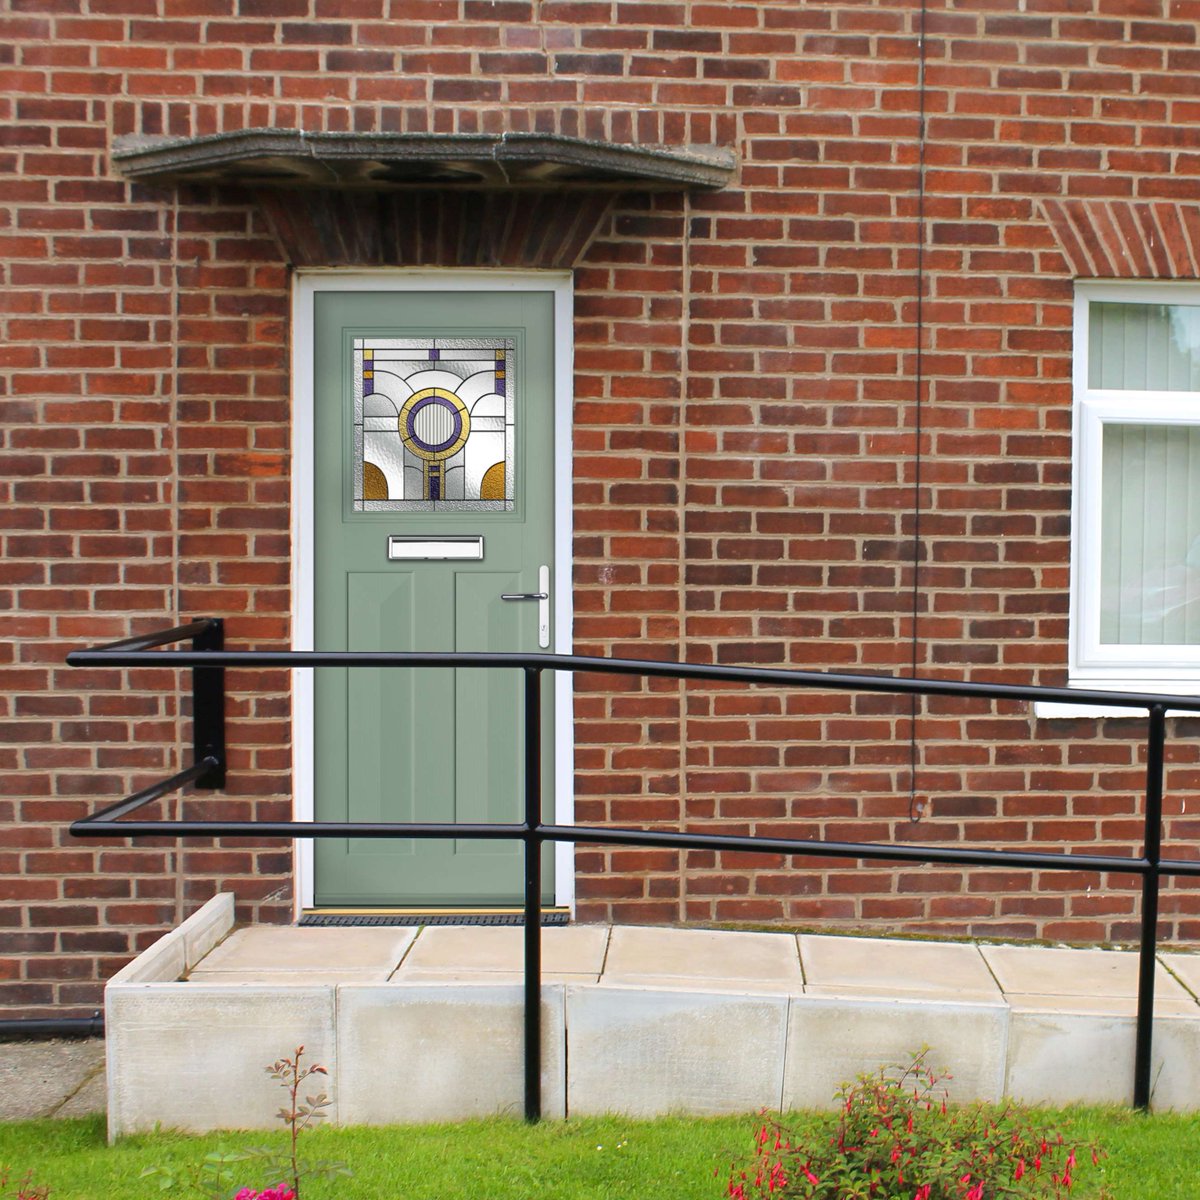 Did you know that our Eaton Door is our widest slab making it perfect for wheelchair accessible entrances?
#GlobalAccessibilityAwarenessDay  #GAAD #compositedoors #accessibility #wheelchairaccess